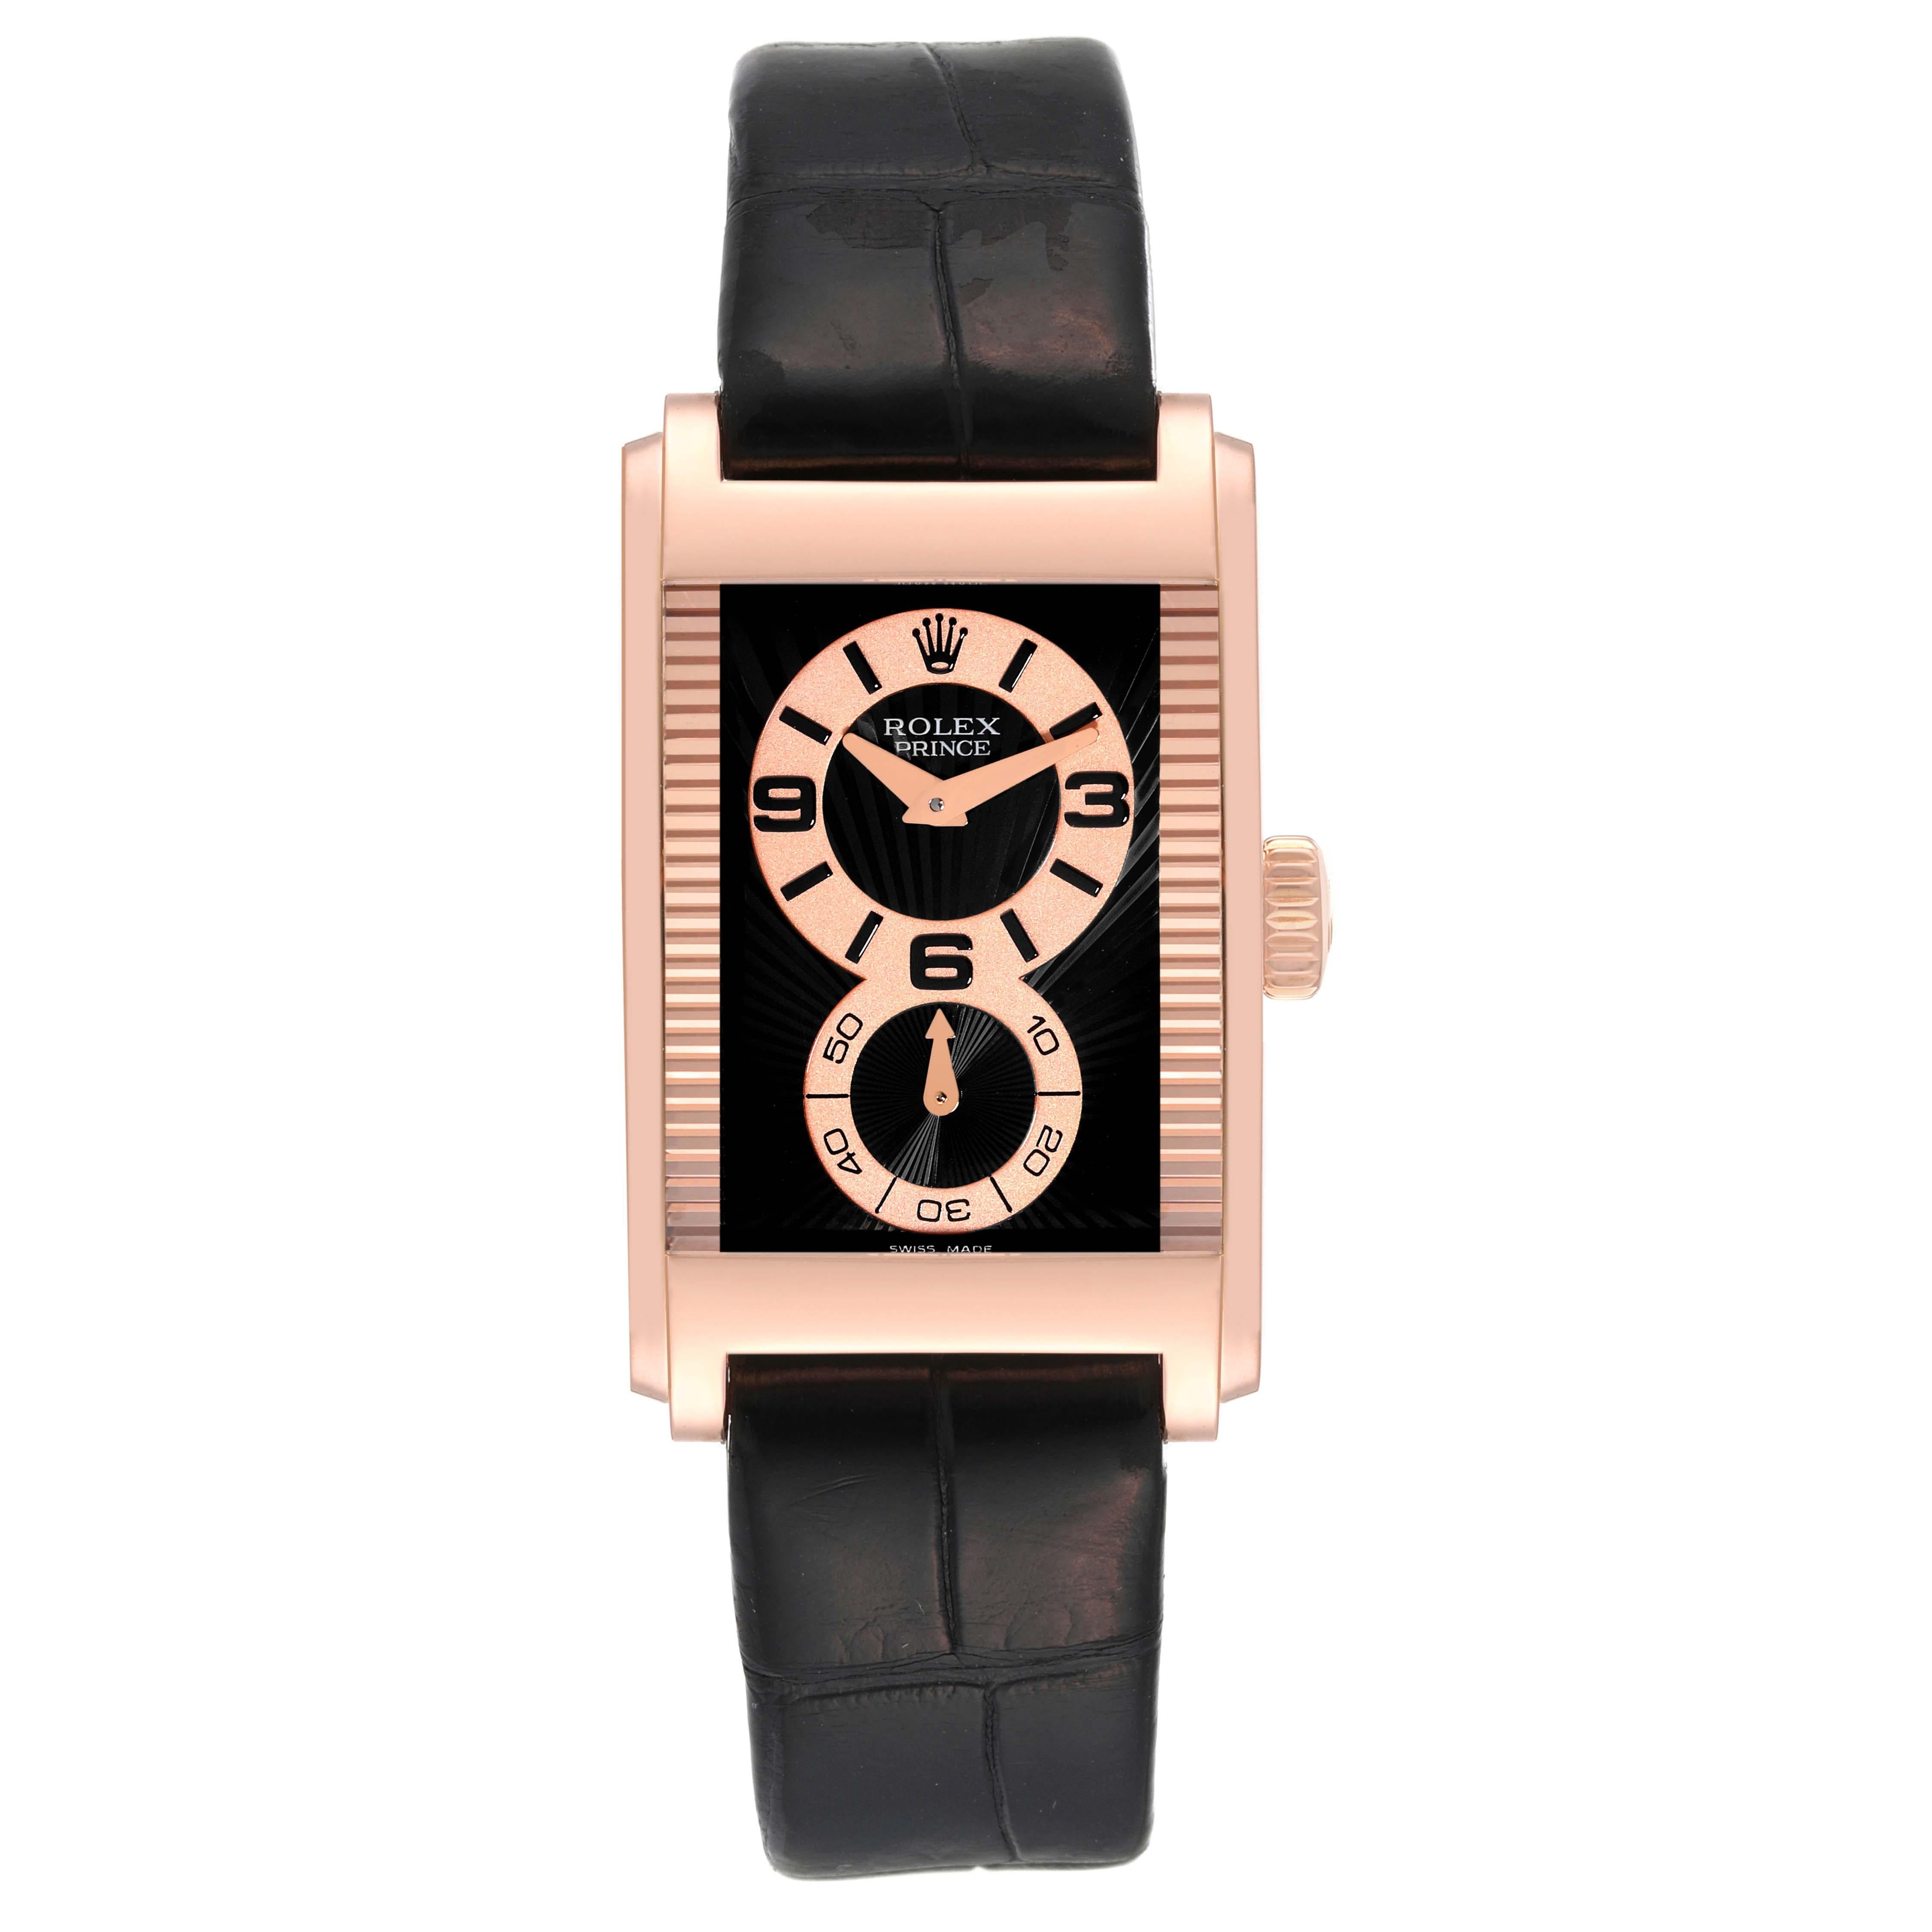 Rolex Cellini Prince Rose Gold Black Dial Leather Strap Mens Watch 5442 Box Card. Manual winding movement. 18k Everose gold case 28.0 x 47.0 mm. Rolex logo on a crown. Exhibition transparent sapphire crystal case back. . Scratch resistant sapphire